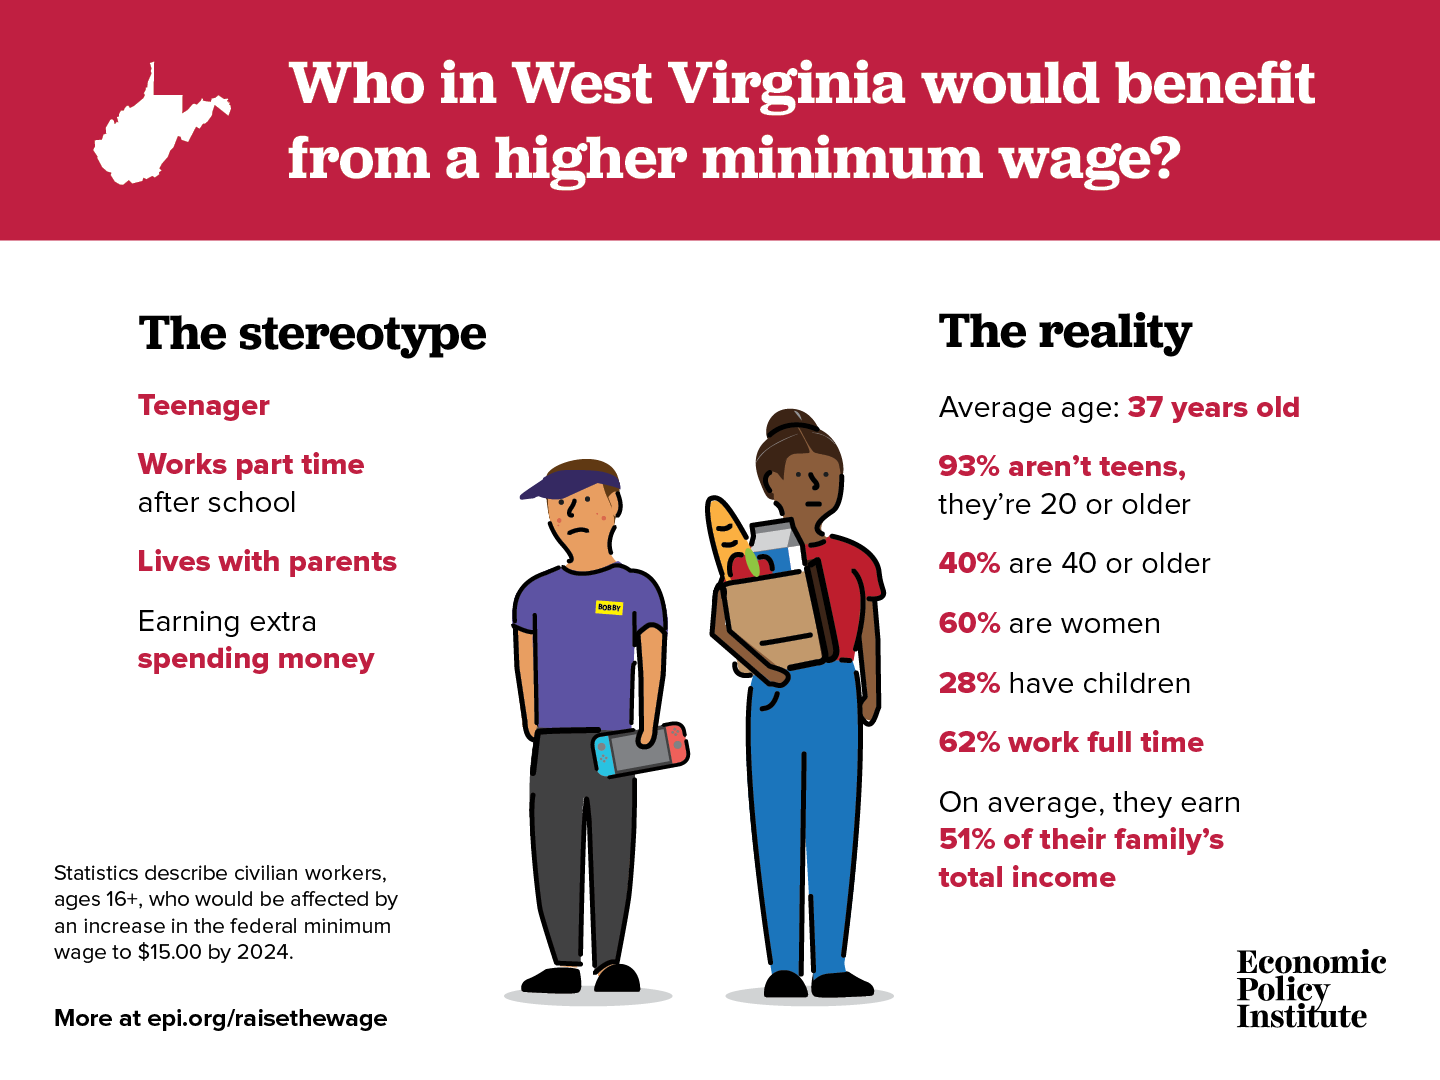 raising-minimum-wage-to-15-an-hour-would-lift-pay-for-255-000-west-virginia-workers-west